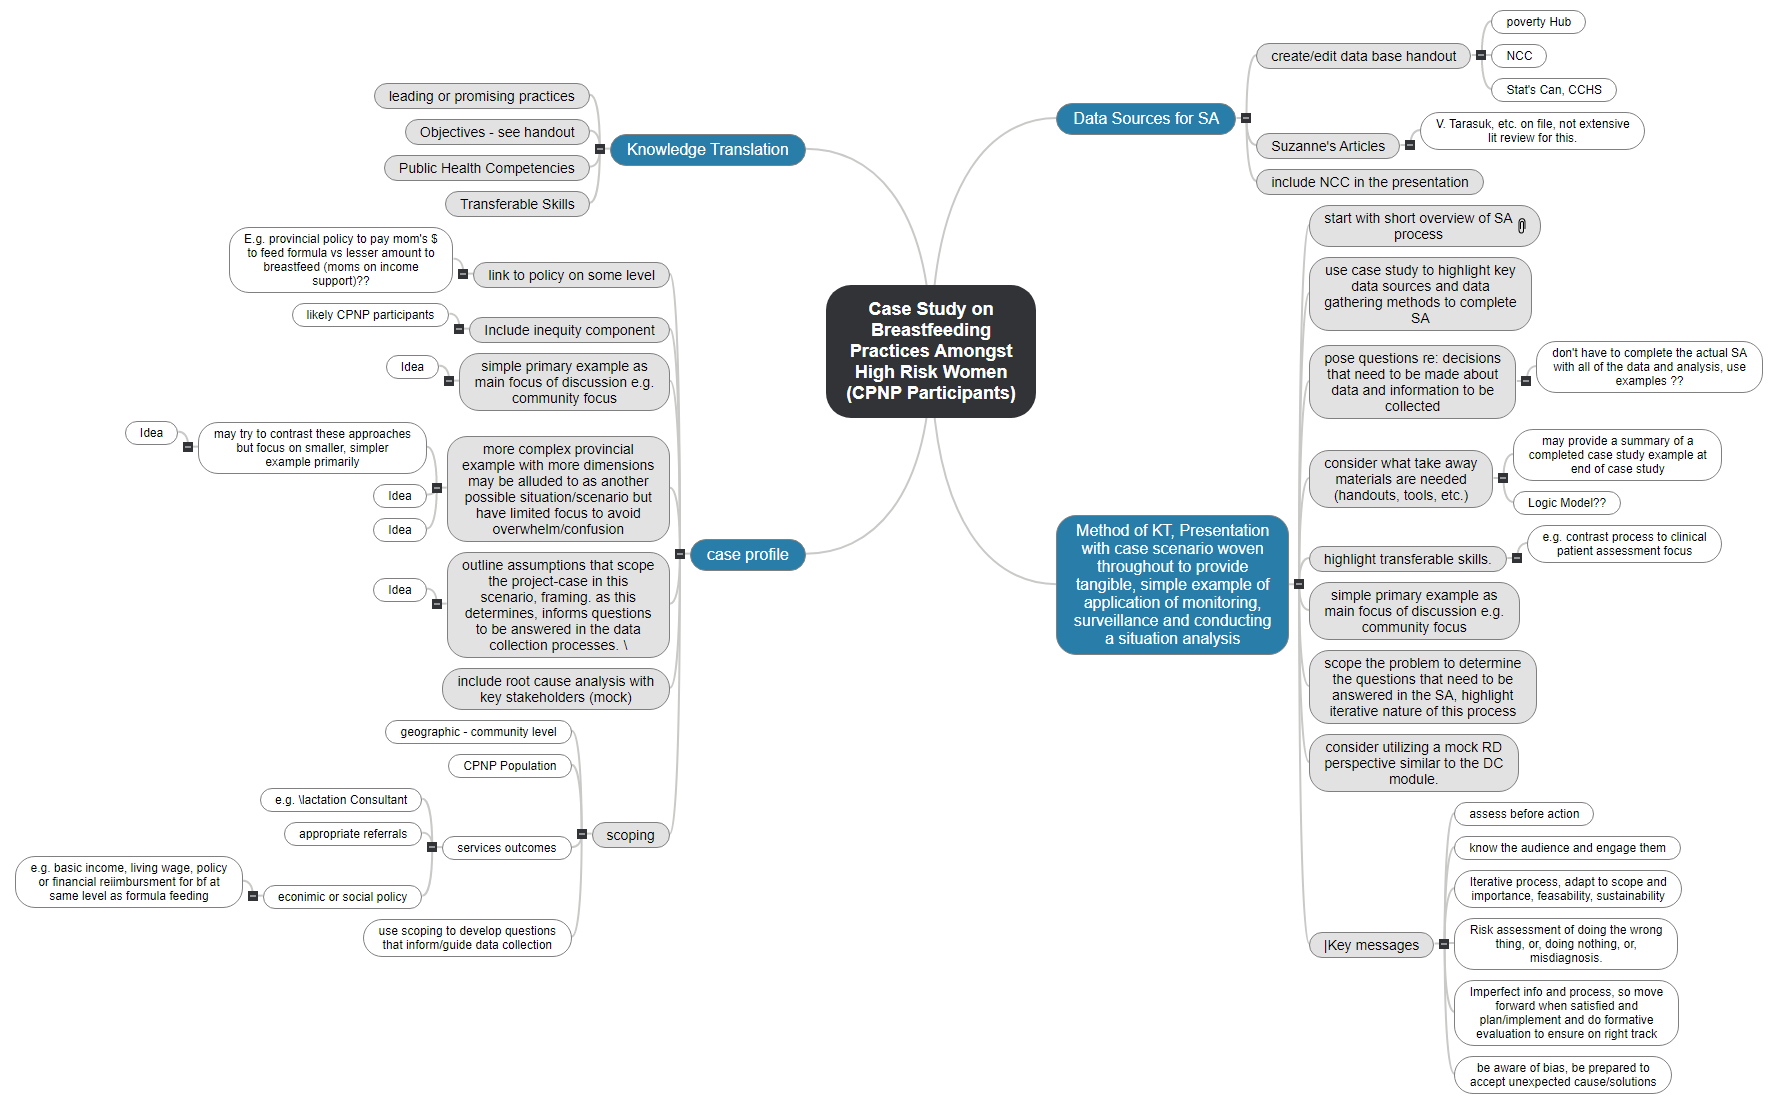 Case Study on  Breastfeeding Practices Amongst High Risk Women (CPNP Participants) Mind Map